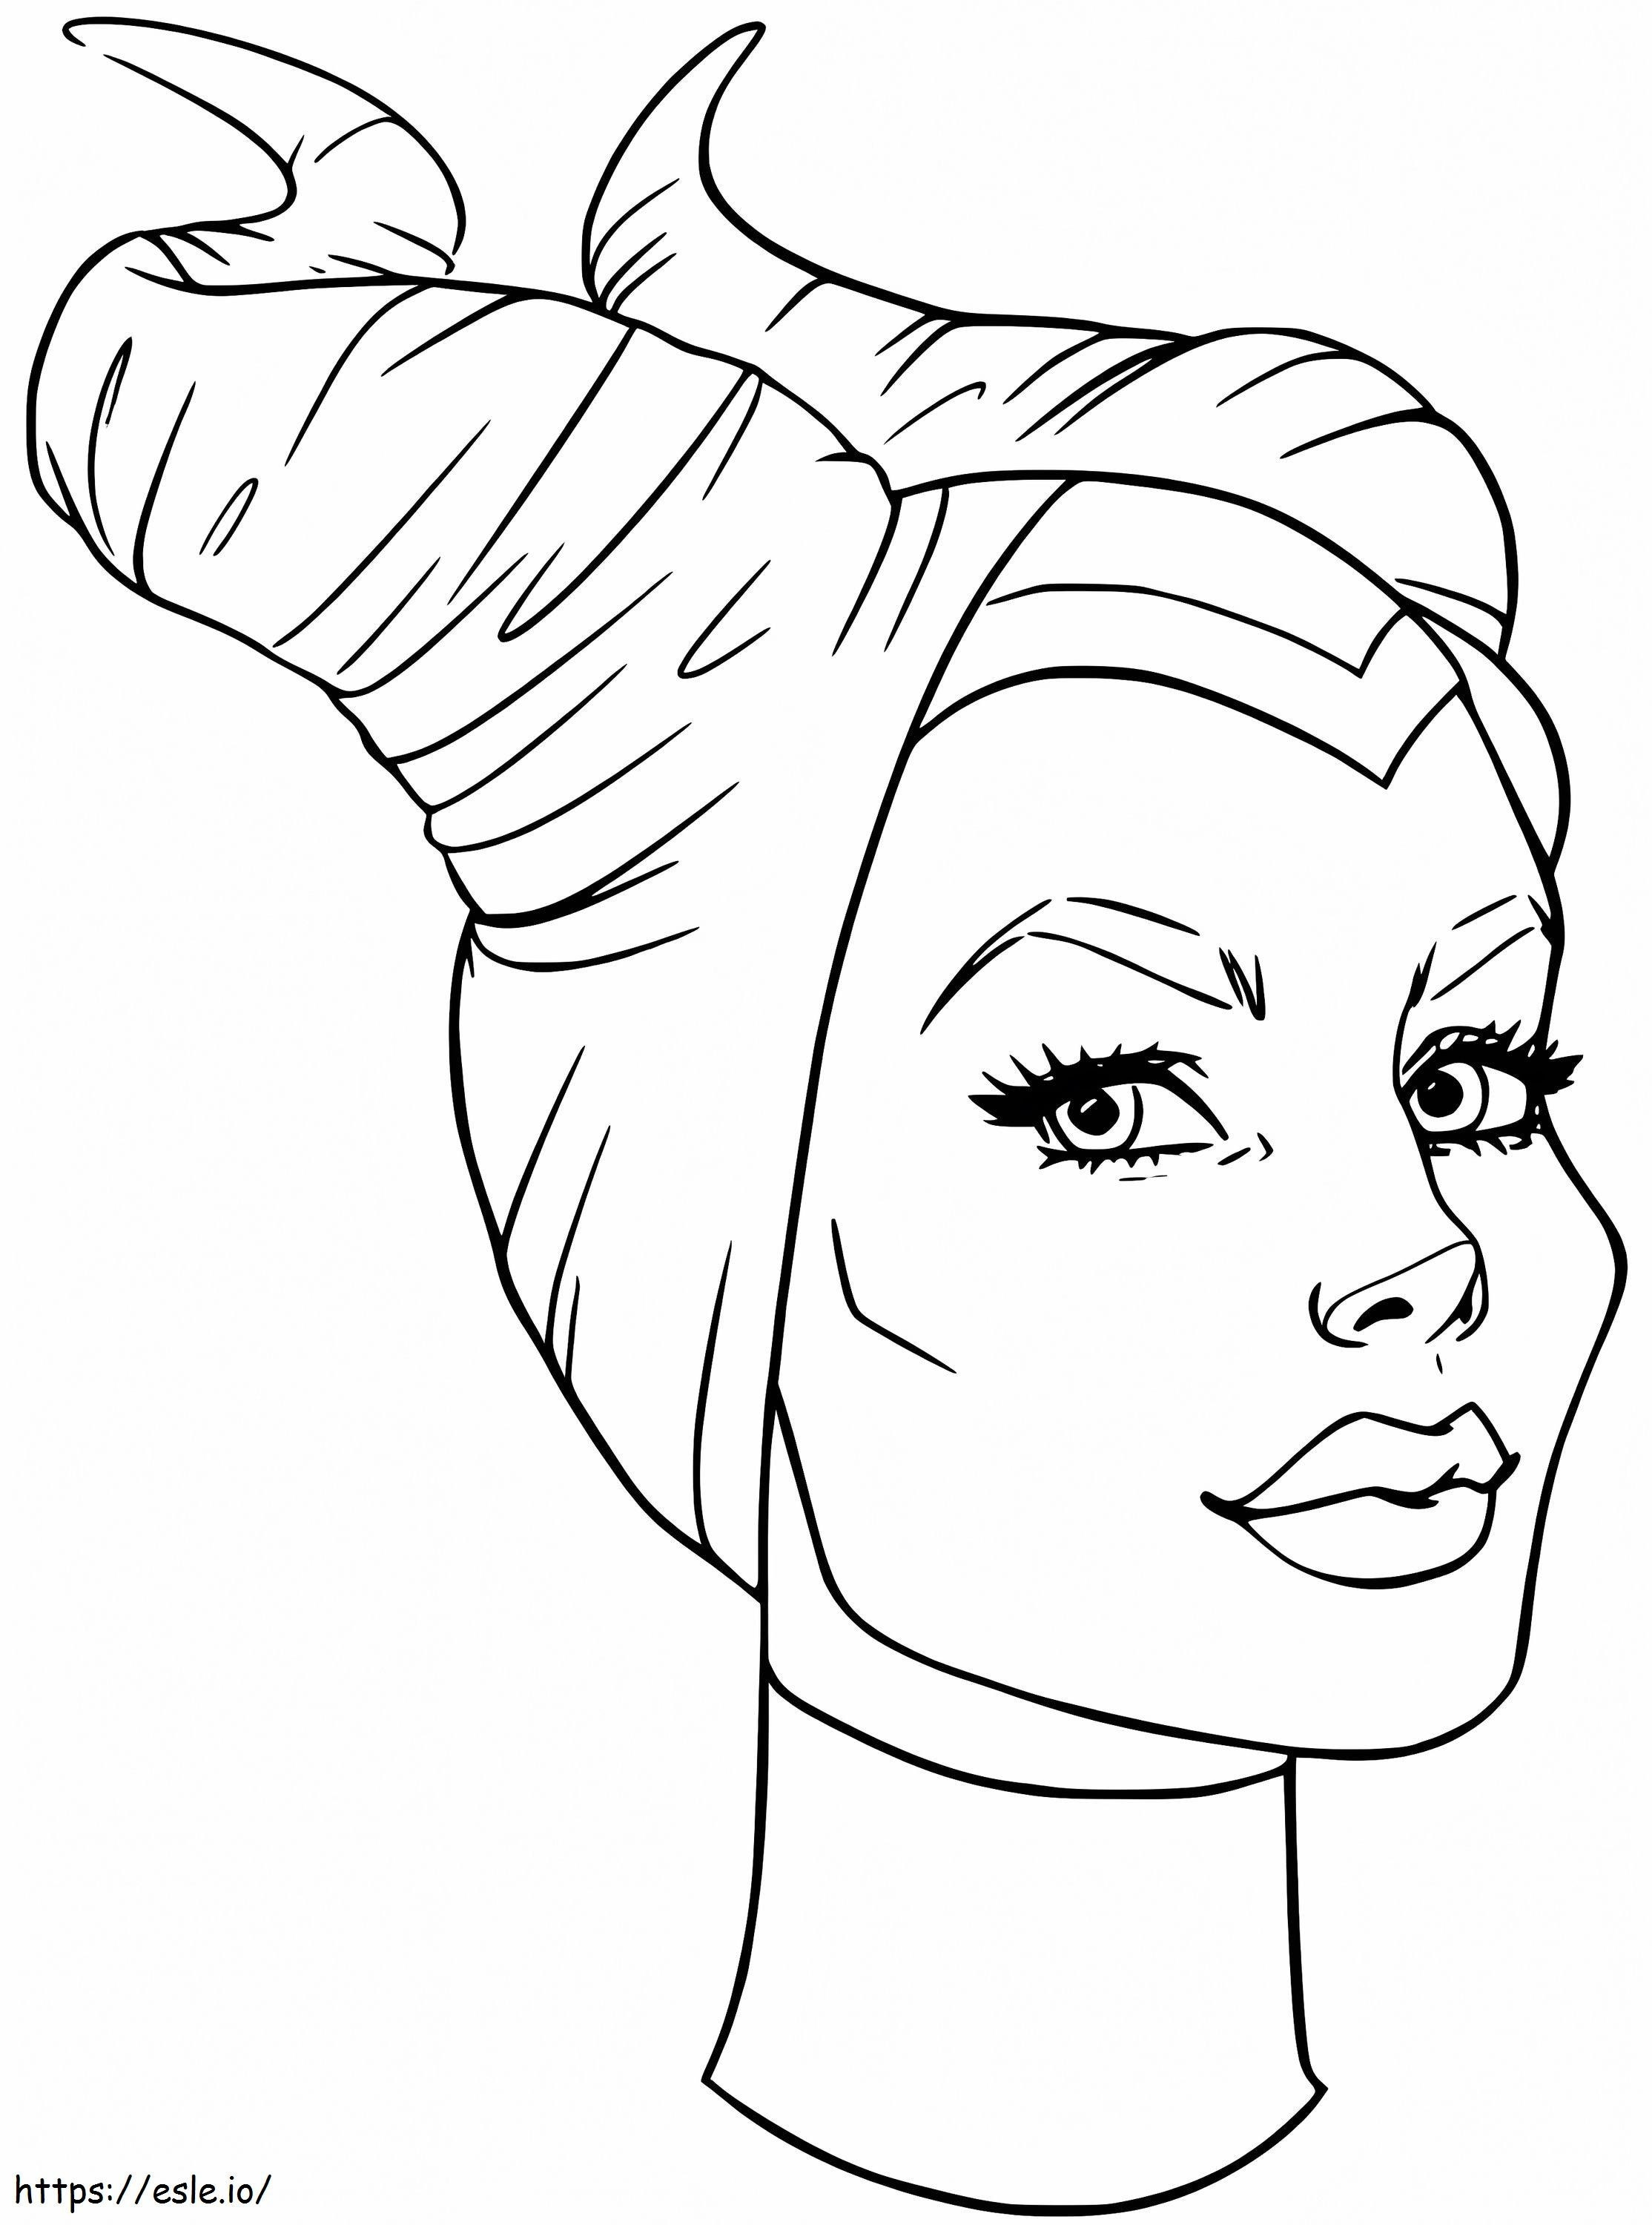 Maleficents Face coloring page